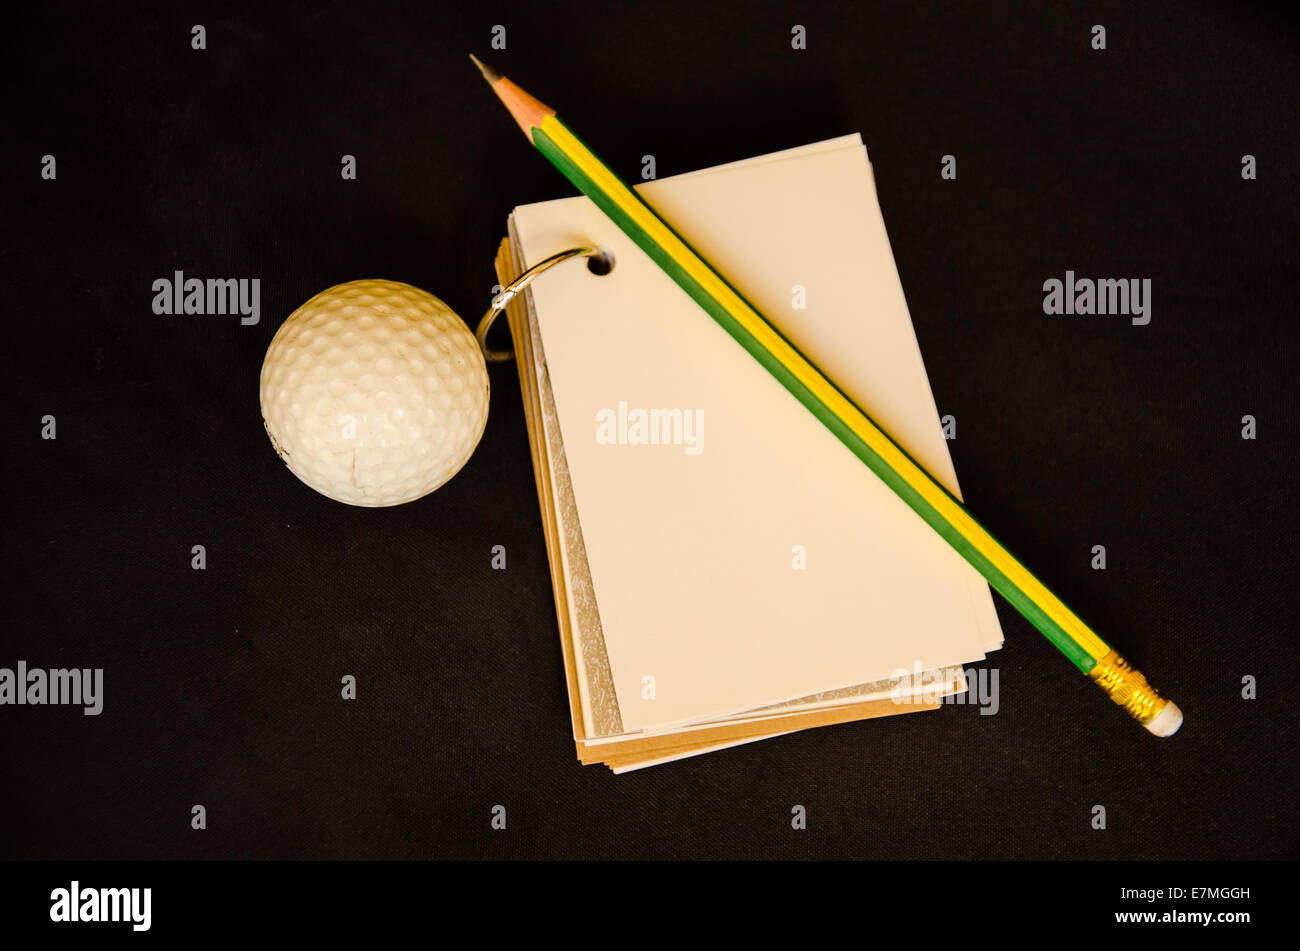 golf ball with notebook score card on black background Stock Photo